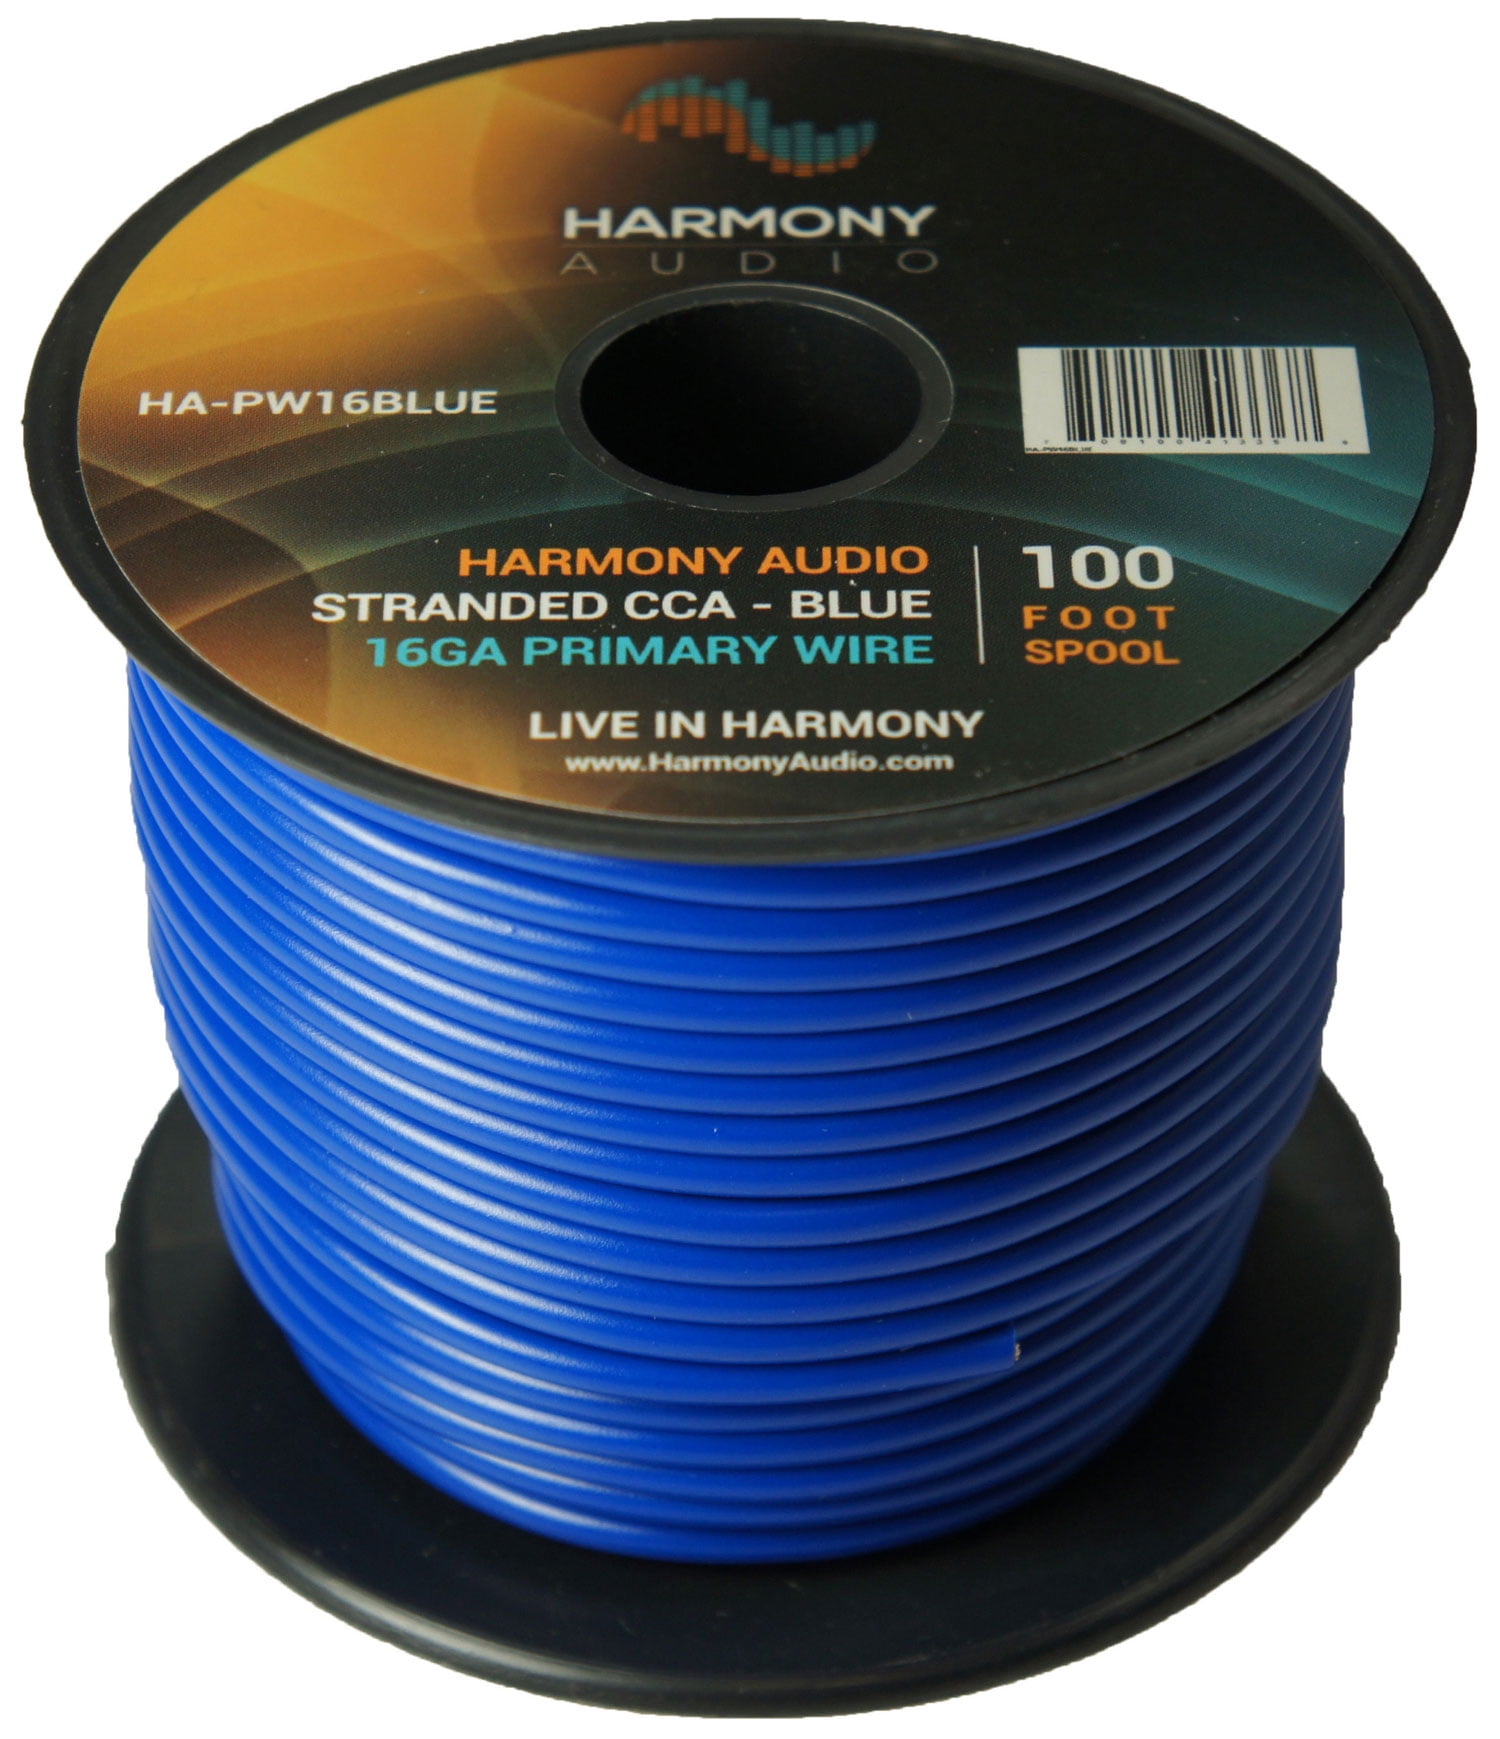 2 Rolls White & Blue for Car Audio/Trailer/Model Train/Remote 200 Feet Harmony Audio Primary Single Conductor 16 Gauge Power or Ground Wire 